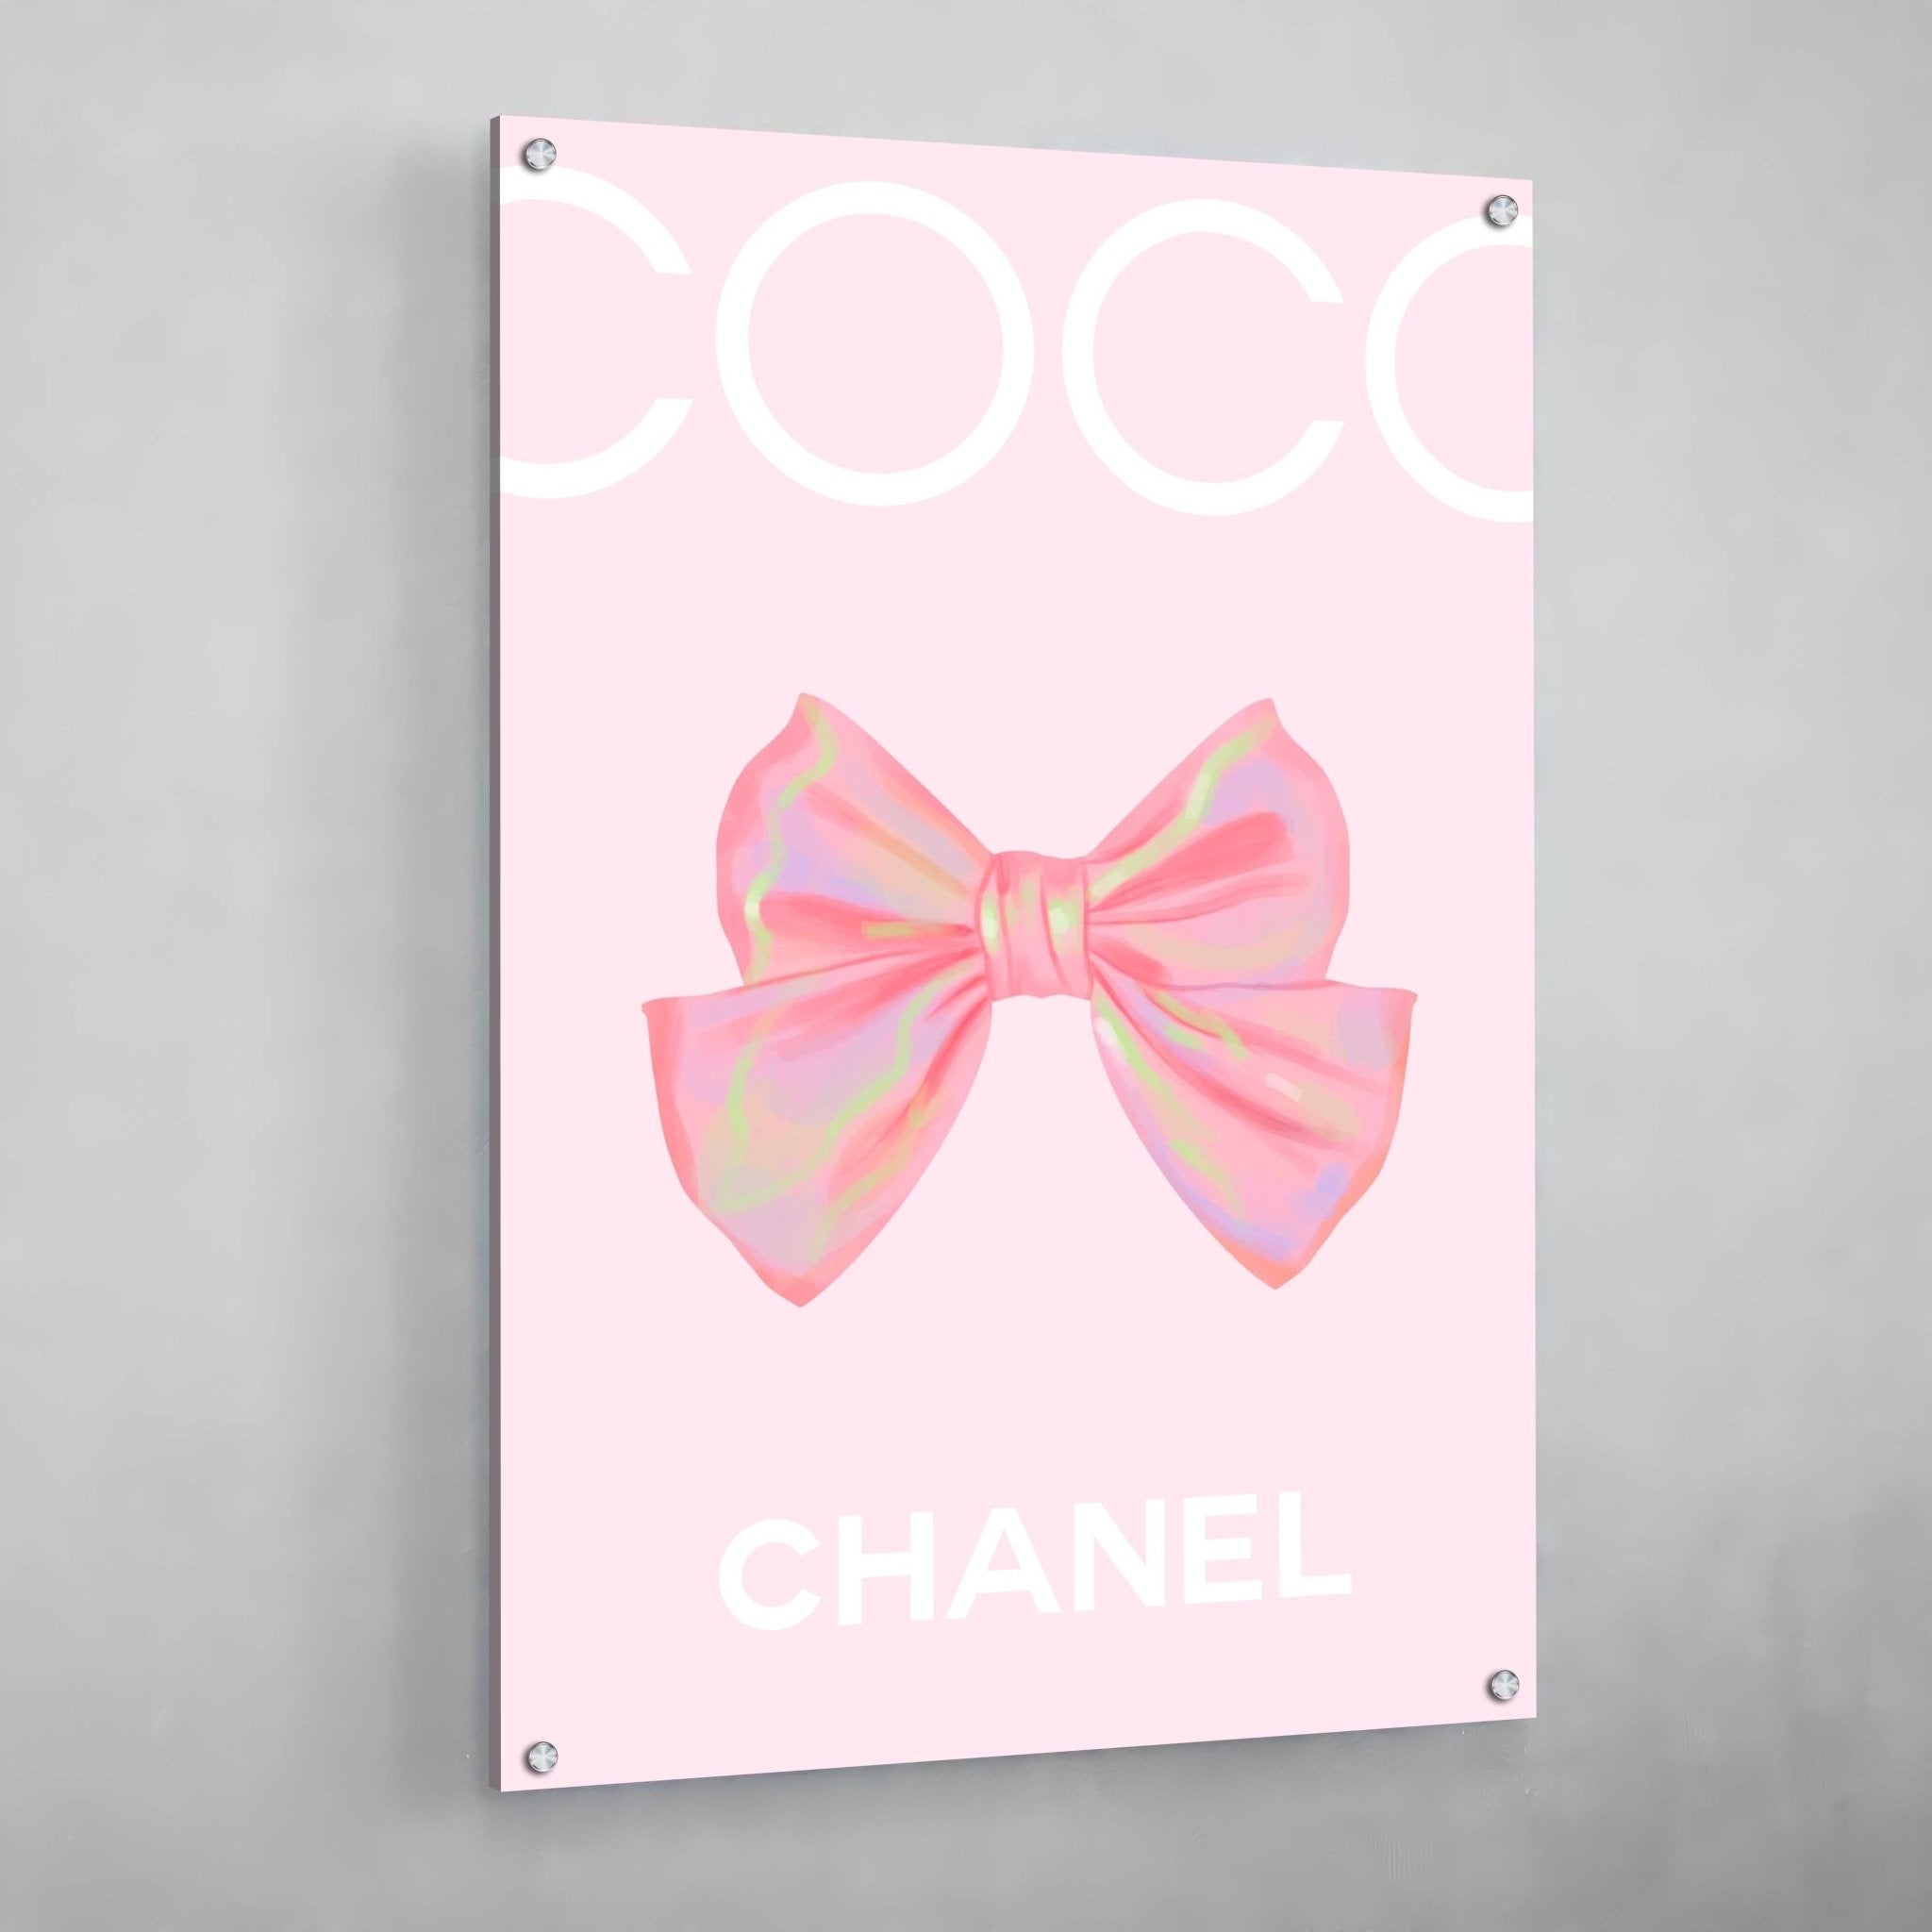 Chanel No 5 in Green and Pink by Coco Chanel Vintage Poster  Canvas Prints   Vintage Printz